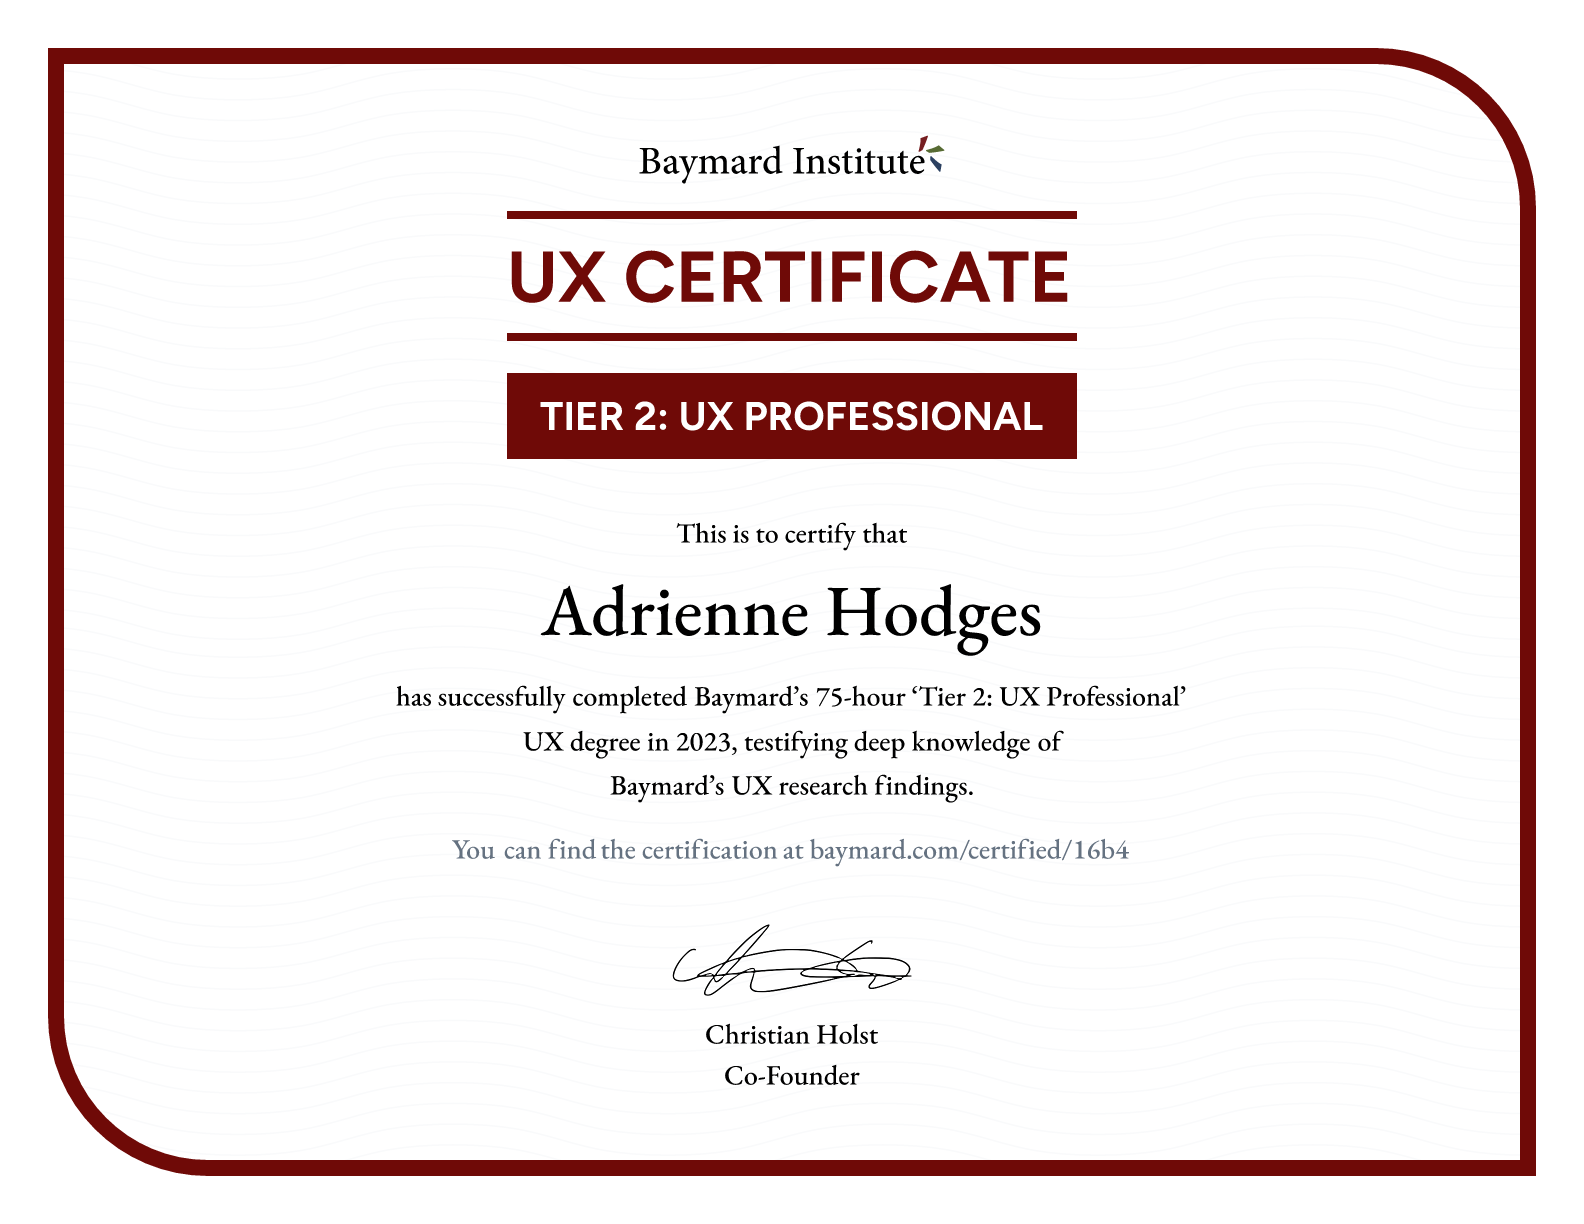 Adrienne Hodges’s certificate